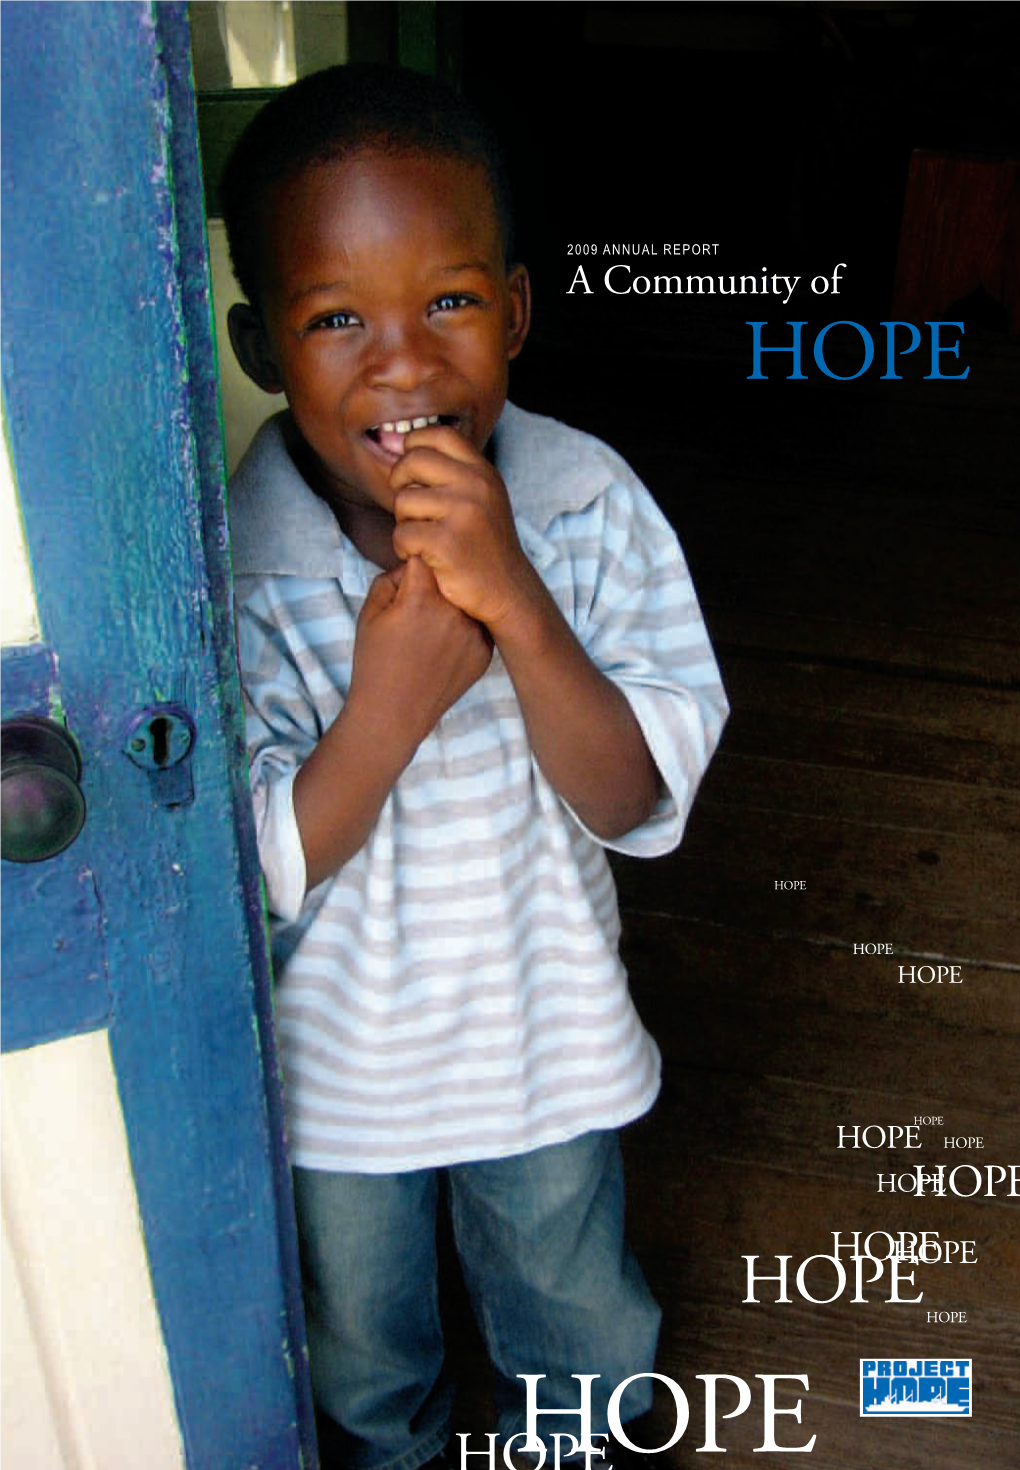 A Community of HOPE a Community of HOPE Building a Community